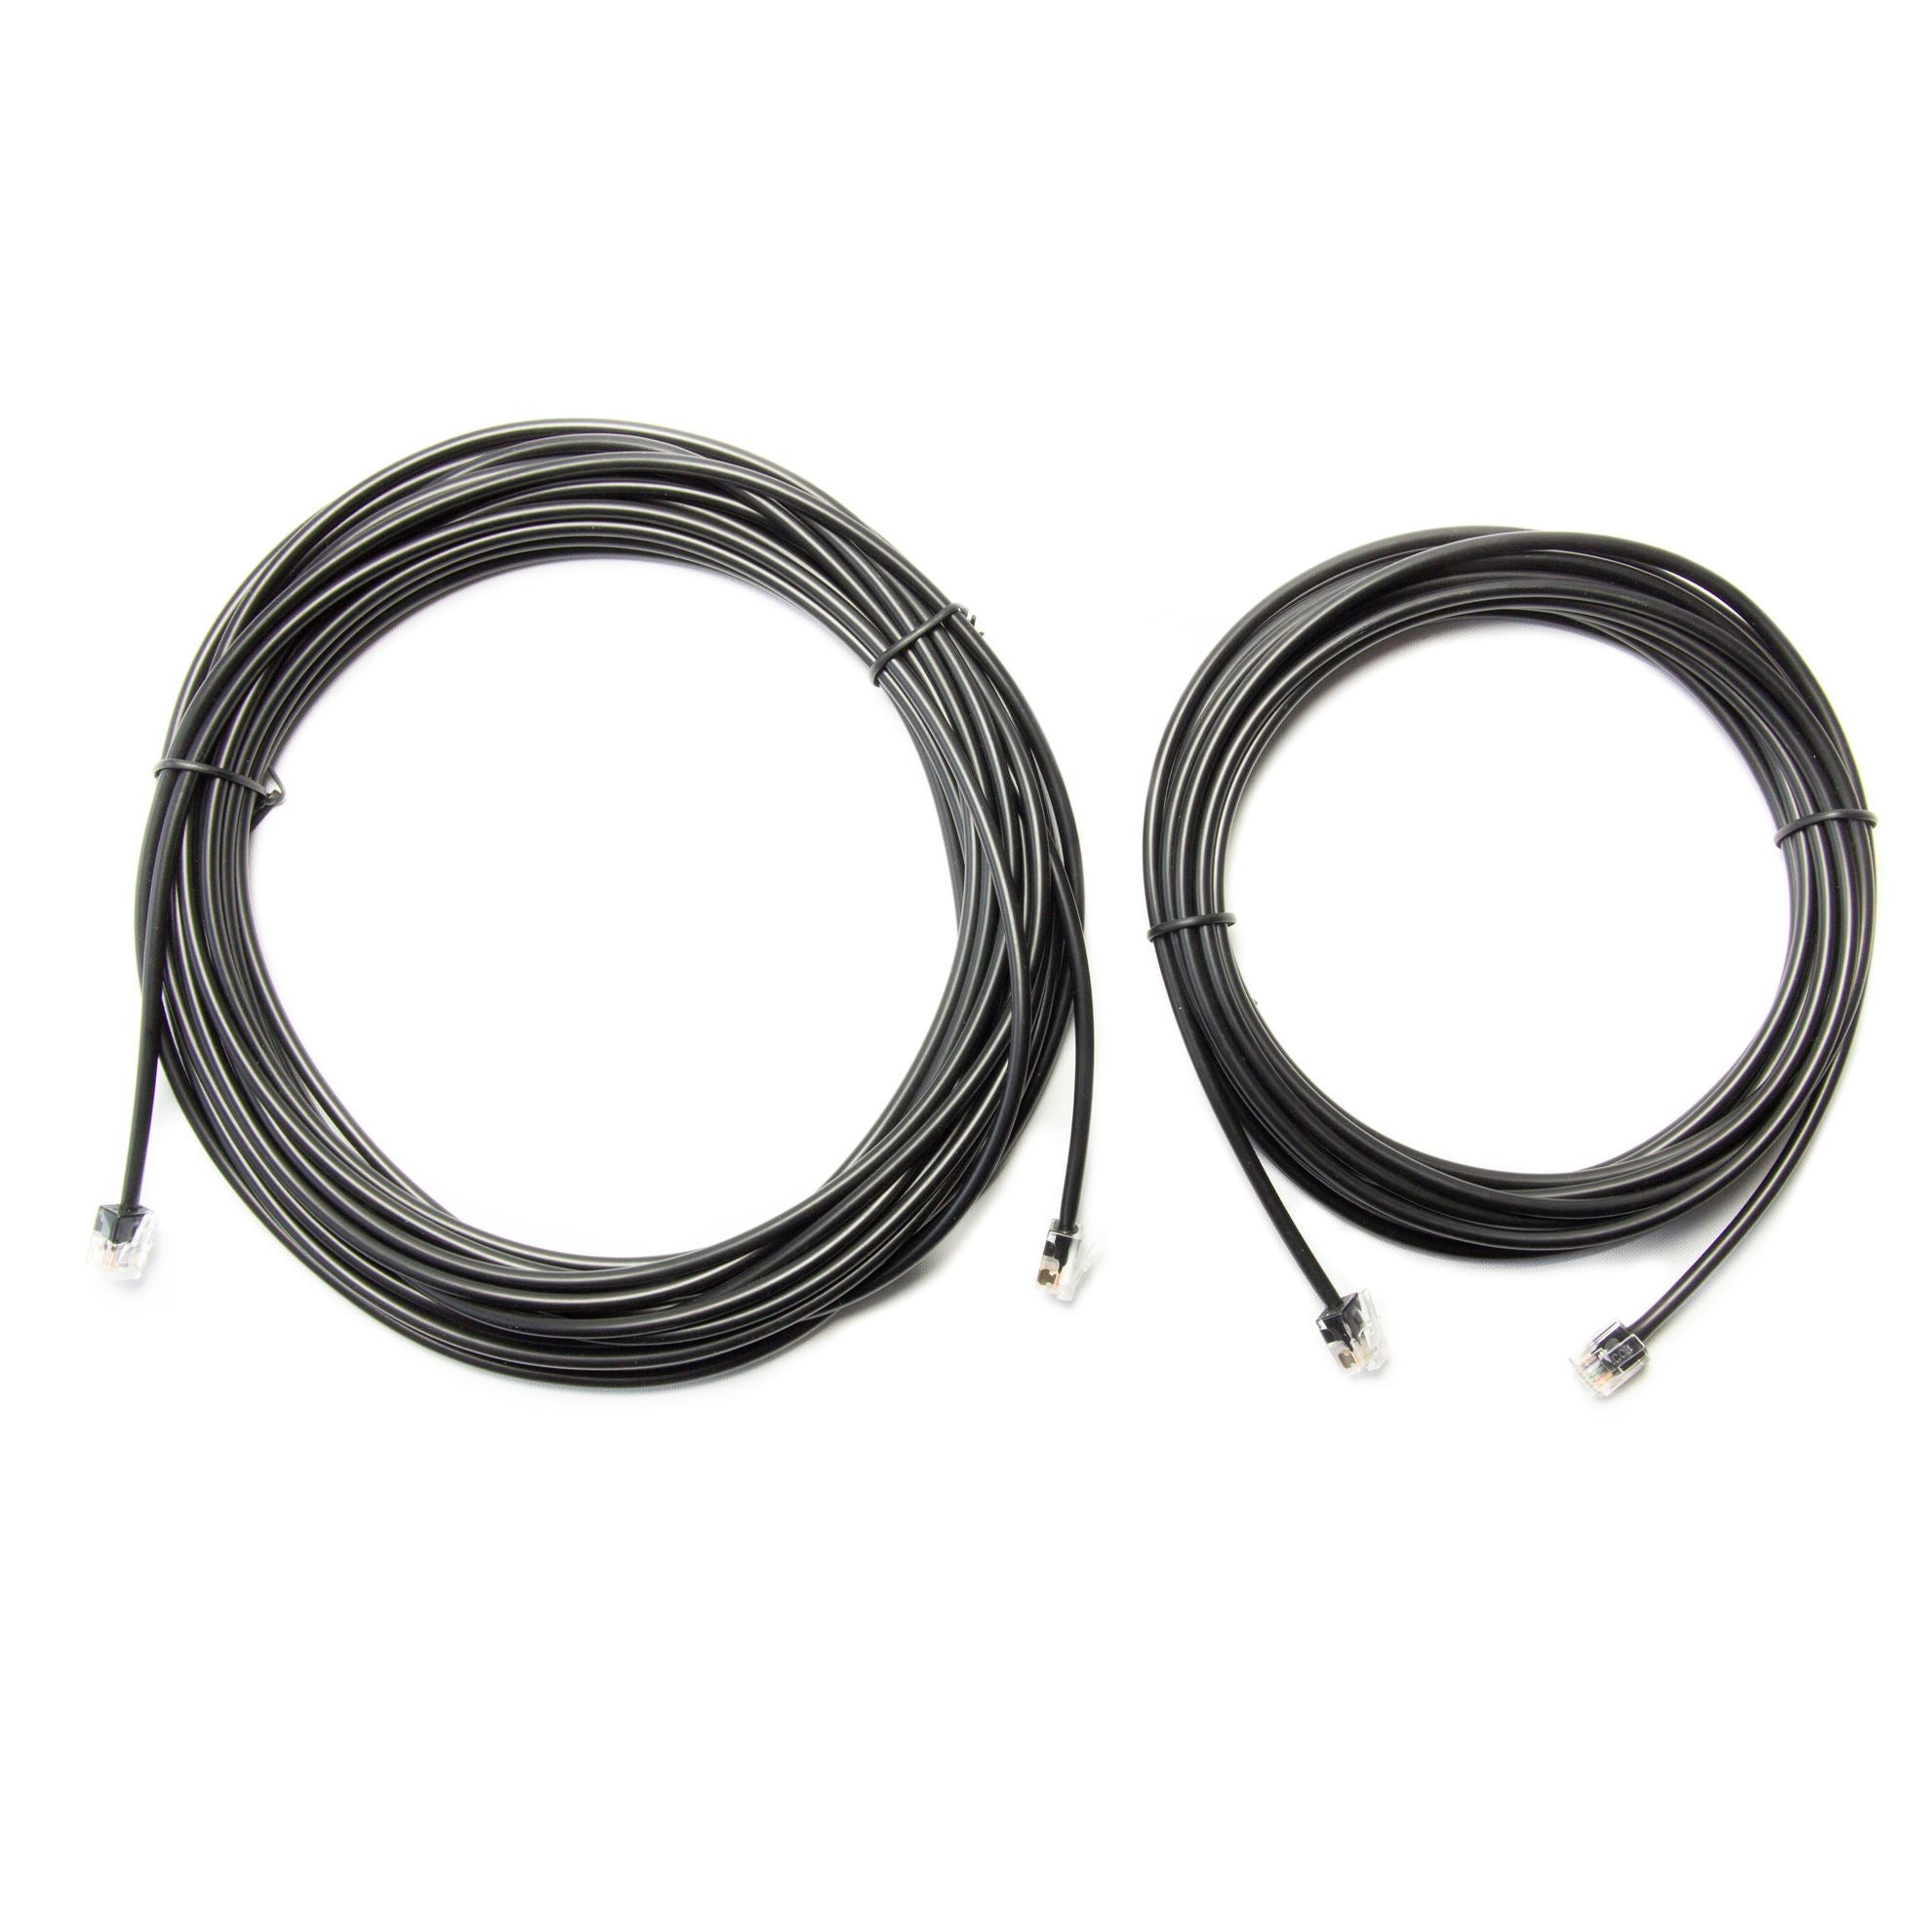 KONFTEL_800-Series_PoE_Injector._Designed_to_Power_PoE_Devices_via_Data_Connection._Supports_the_Standard_IEEE_802.3af/at_(PoE+)._2m_Ethernet_and_1.8m_Power_Cable_Included.